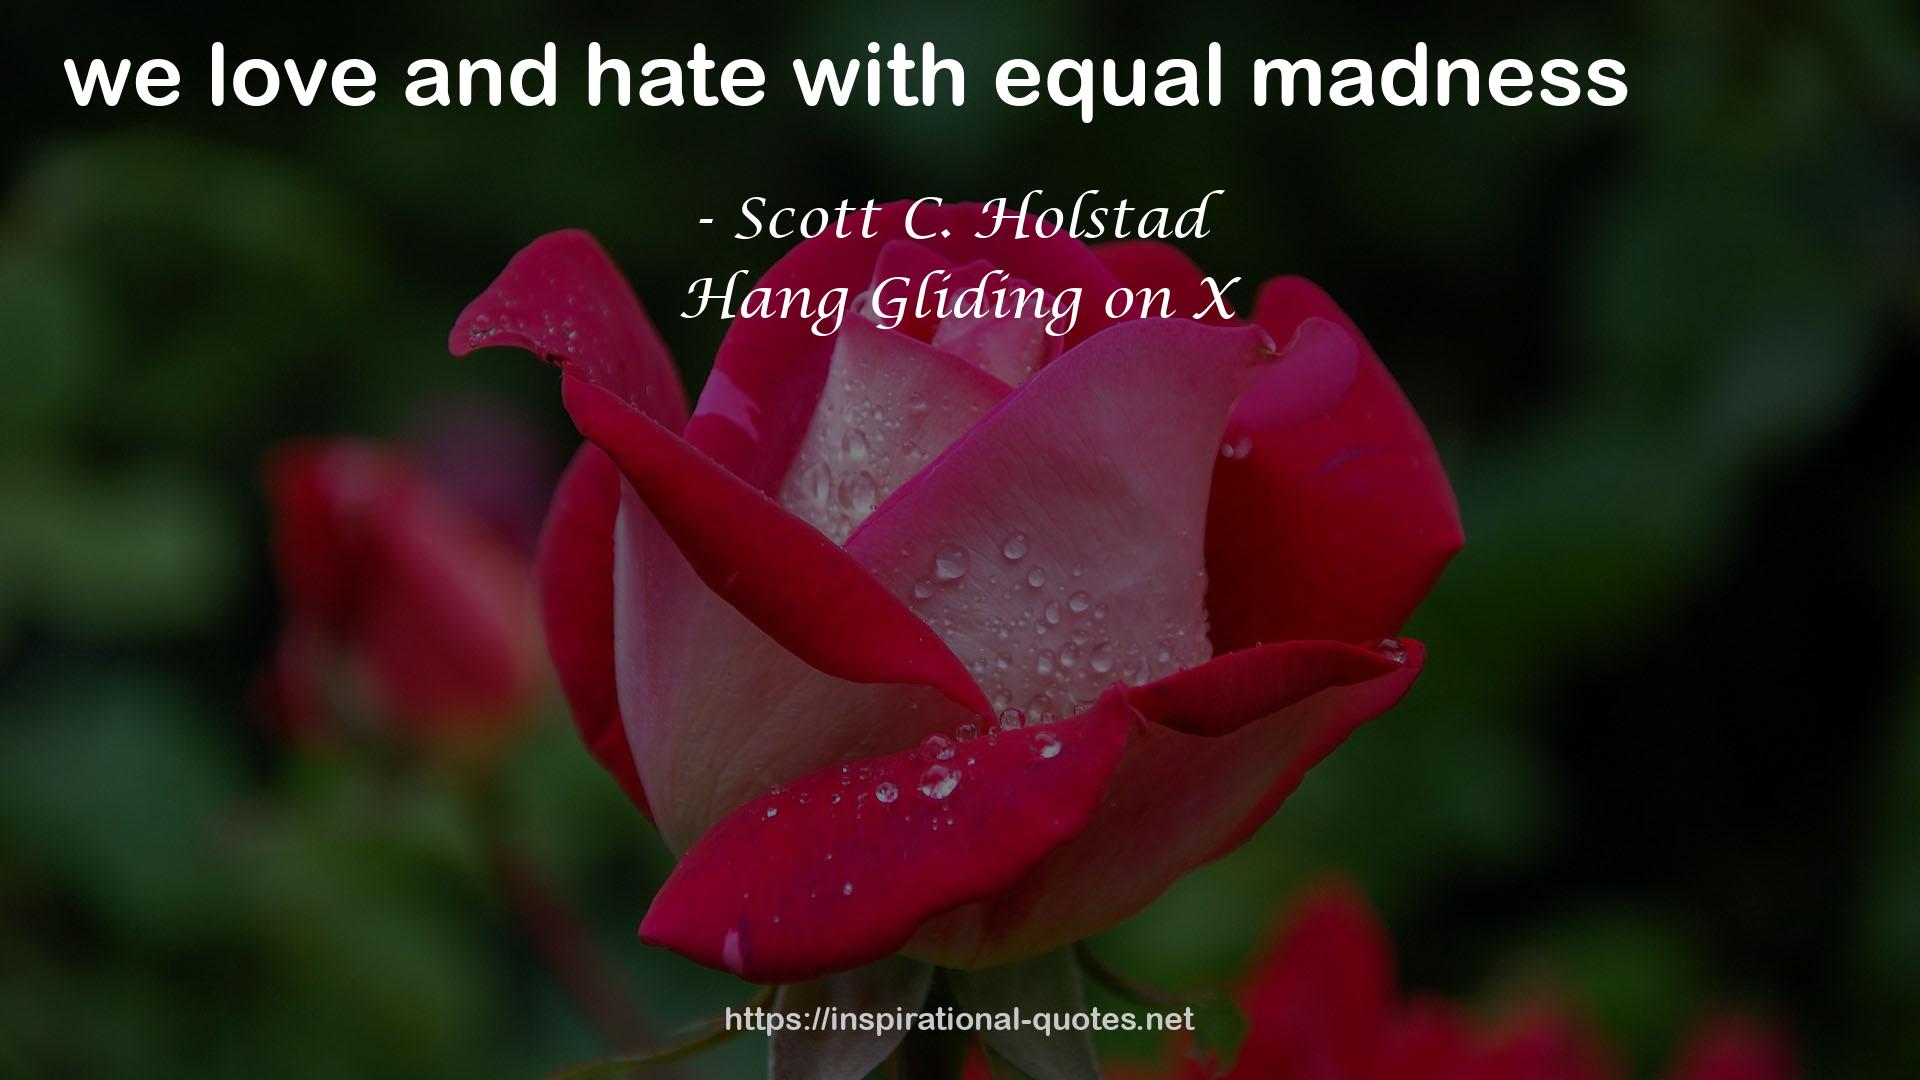 Scott C. Holstad quote : we love and hate with equal madness